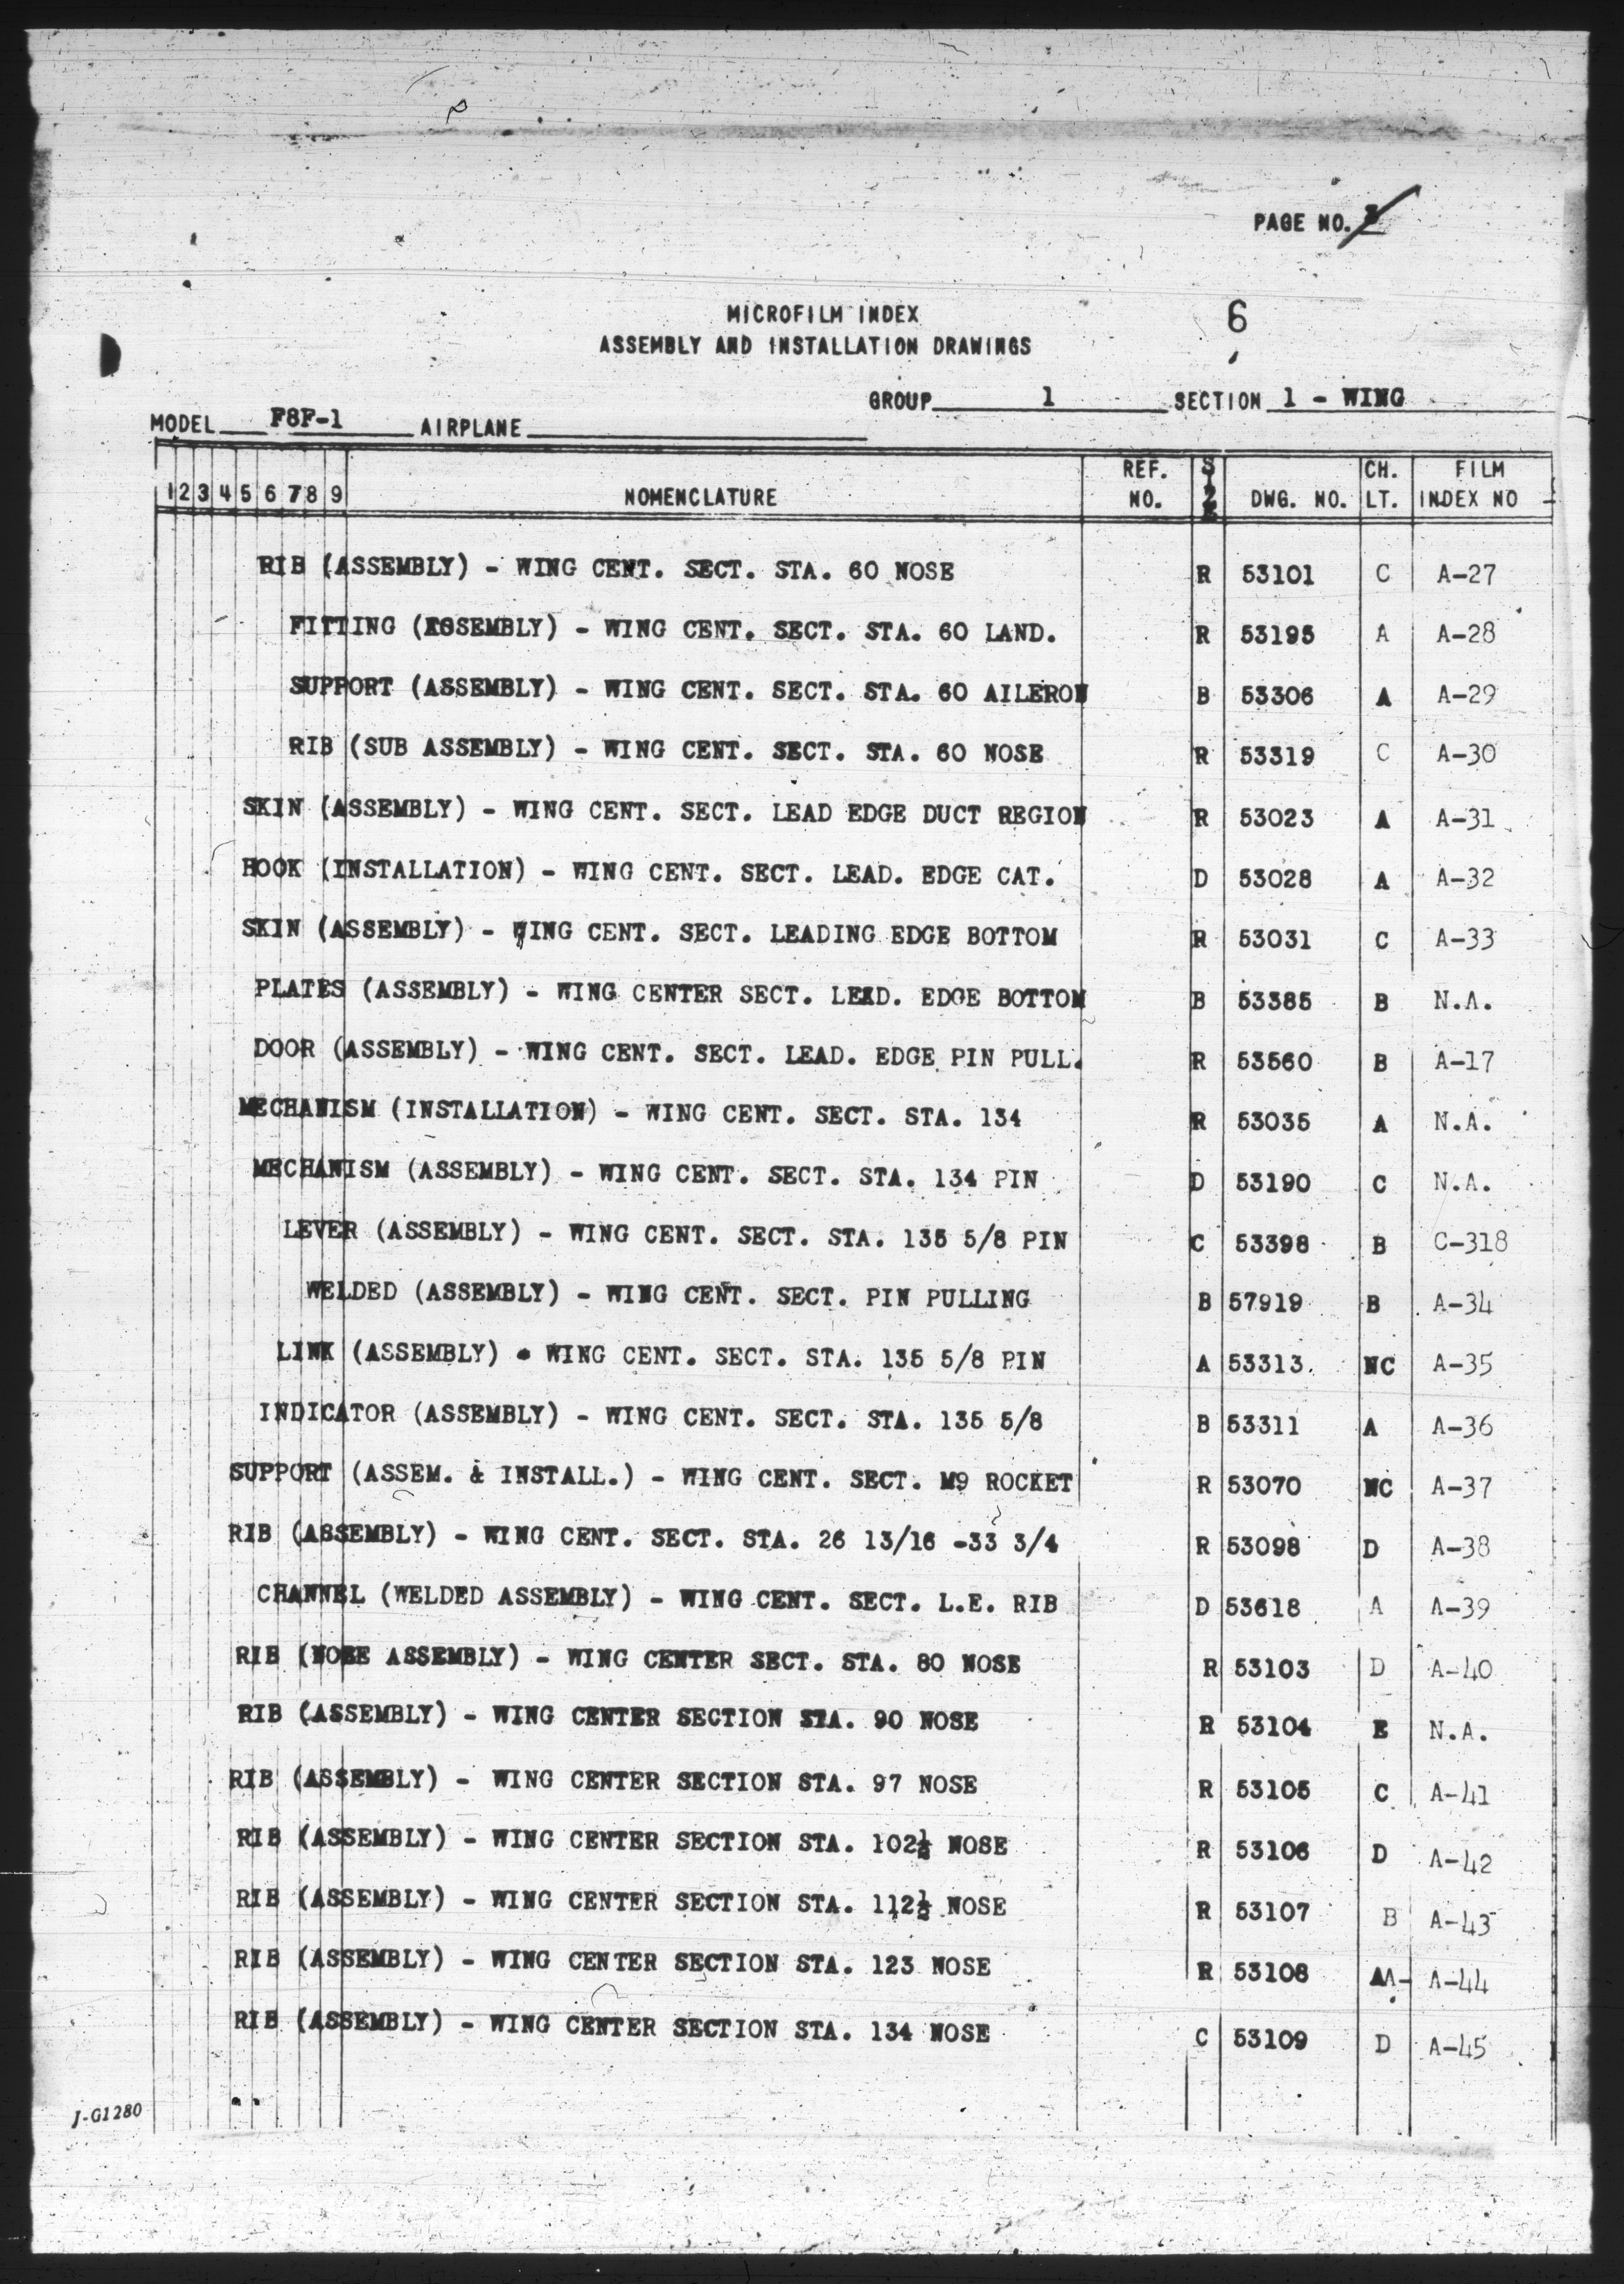 Sample page 5 from AirCorps Library document: Microfilm Index for F8F-1